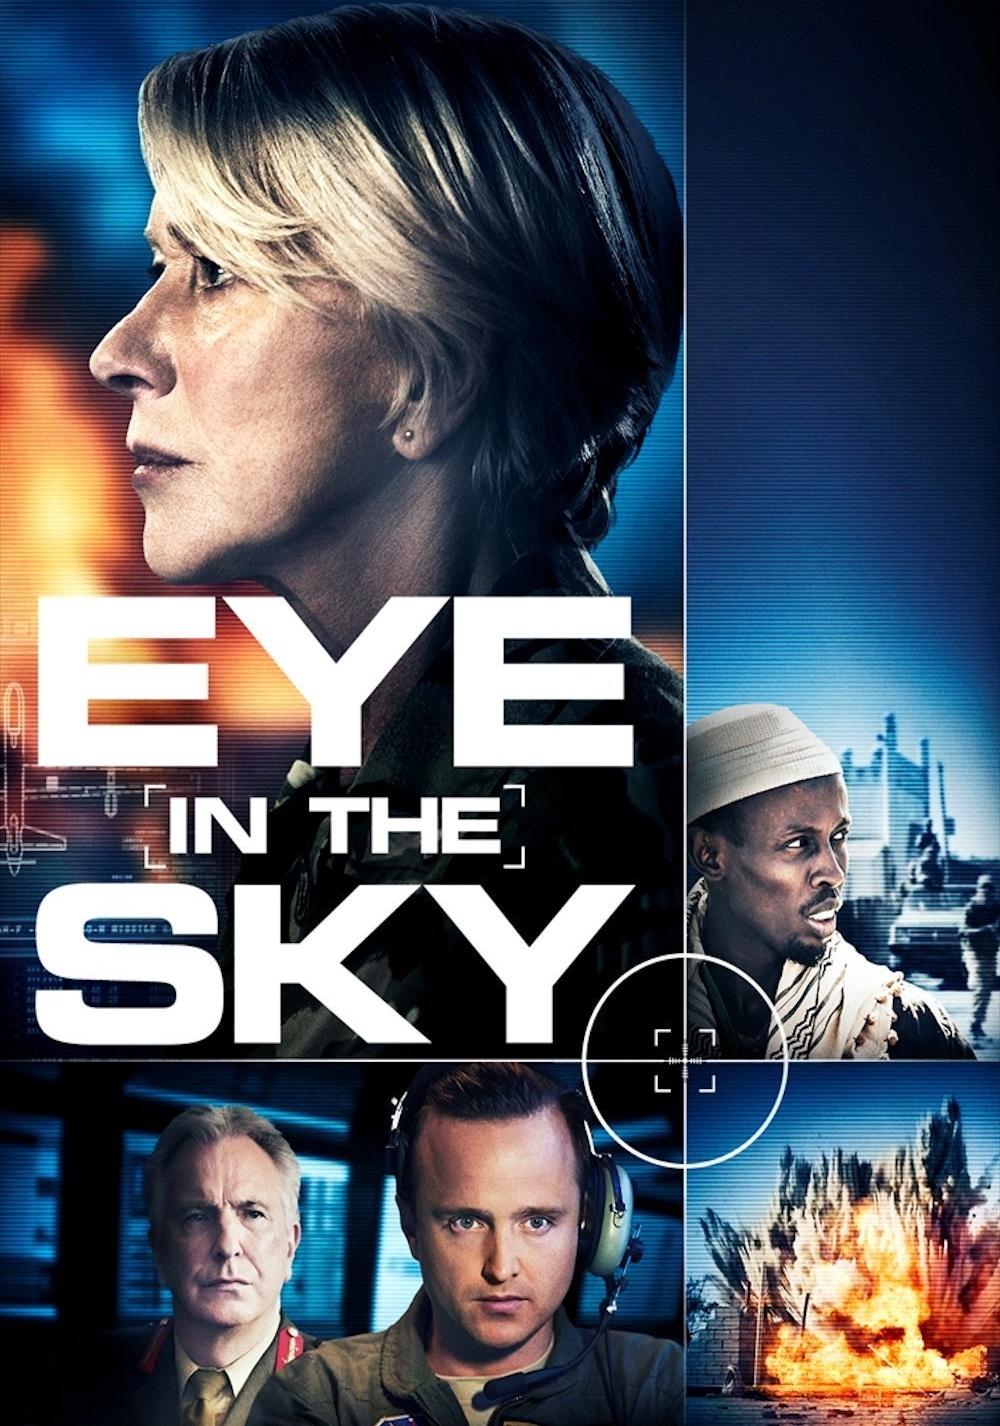 terrierman-s-daily-dose-eye-in-the-sky